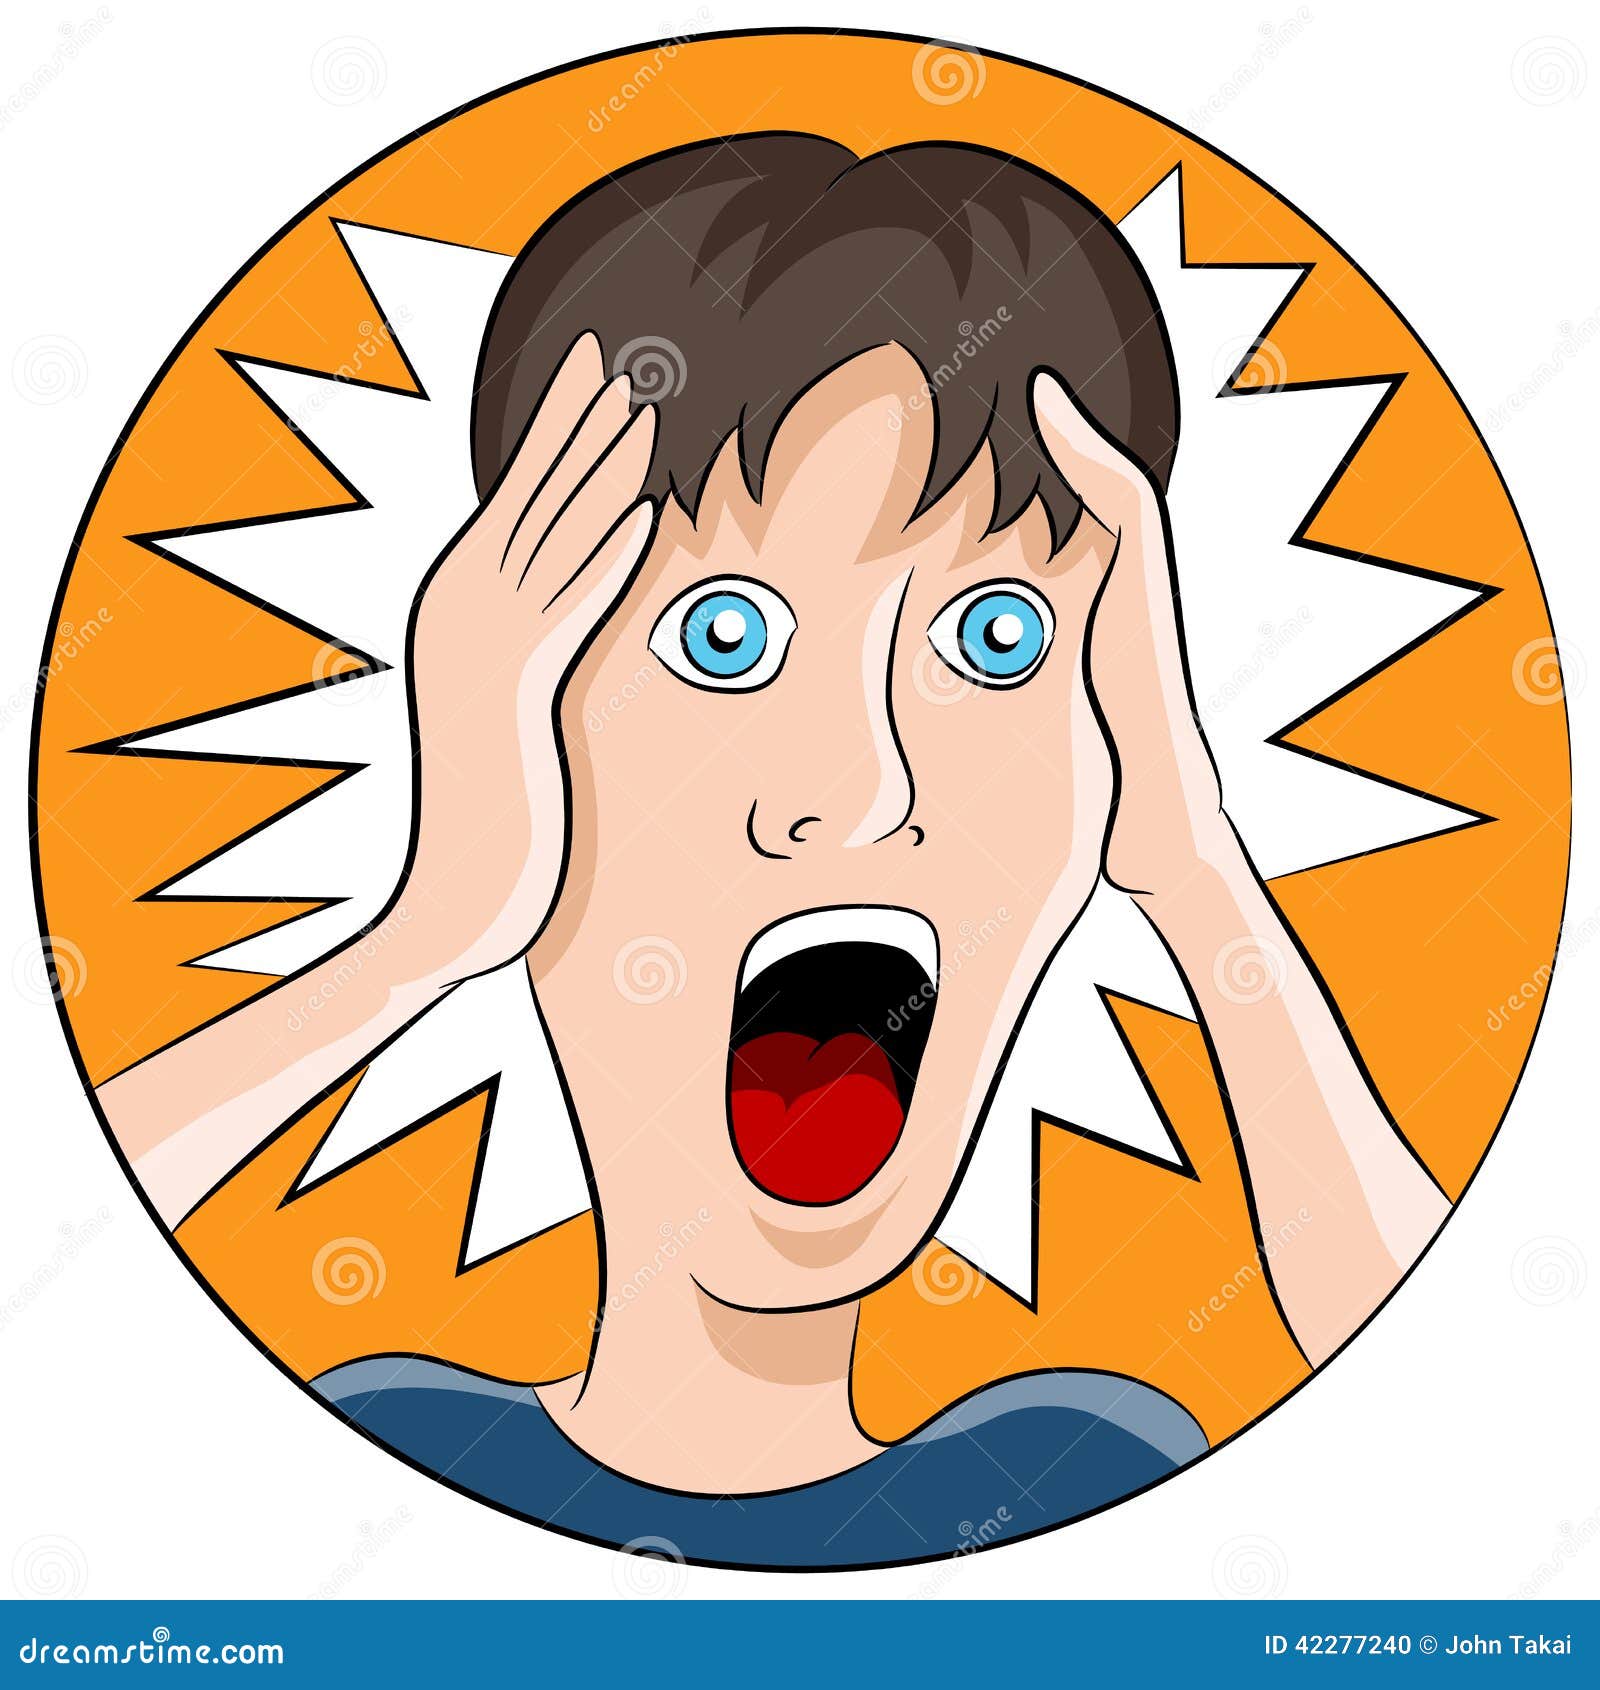 Flabbergasted Cartoons, Illustrations & Vector Stock Images - 13